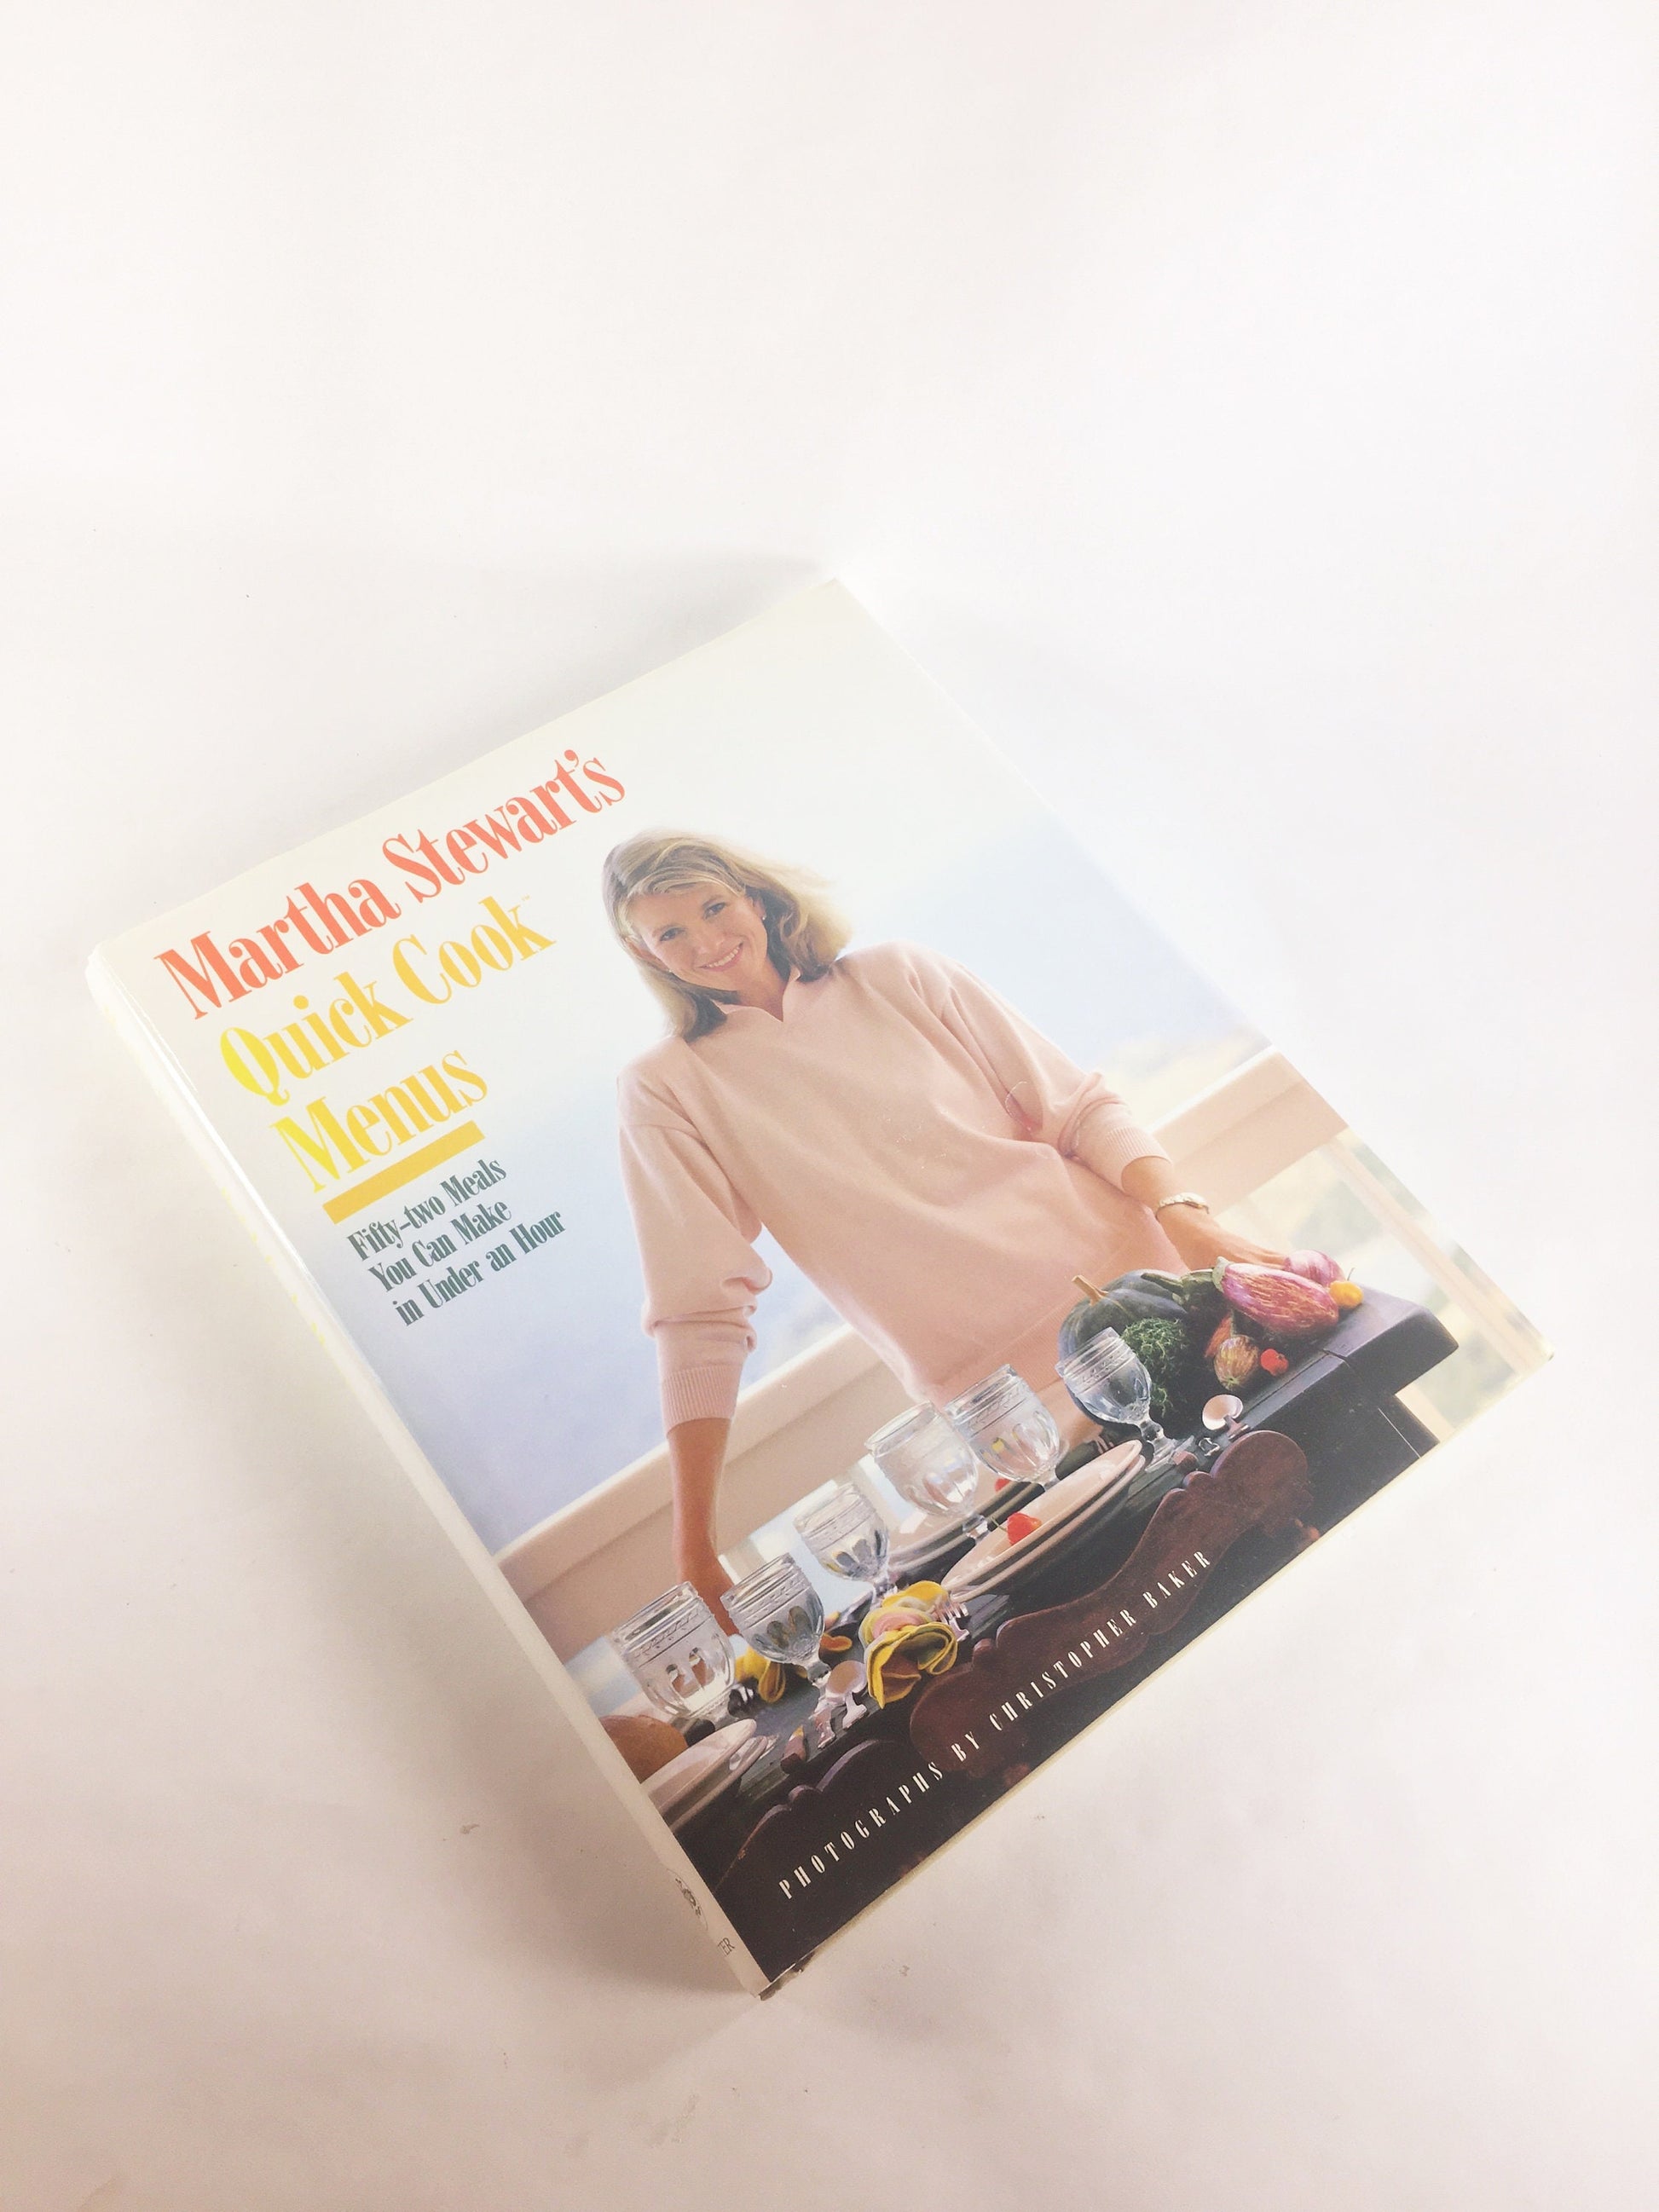 SIGNED Martha Stewart vintage cookbook Quick Cook Menus circa 1988 autographed Unique and collectible kitchen gift! Recipes cooking